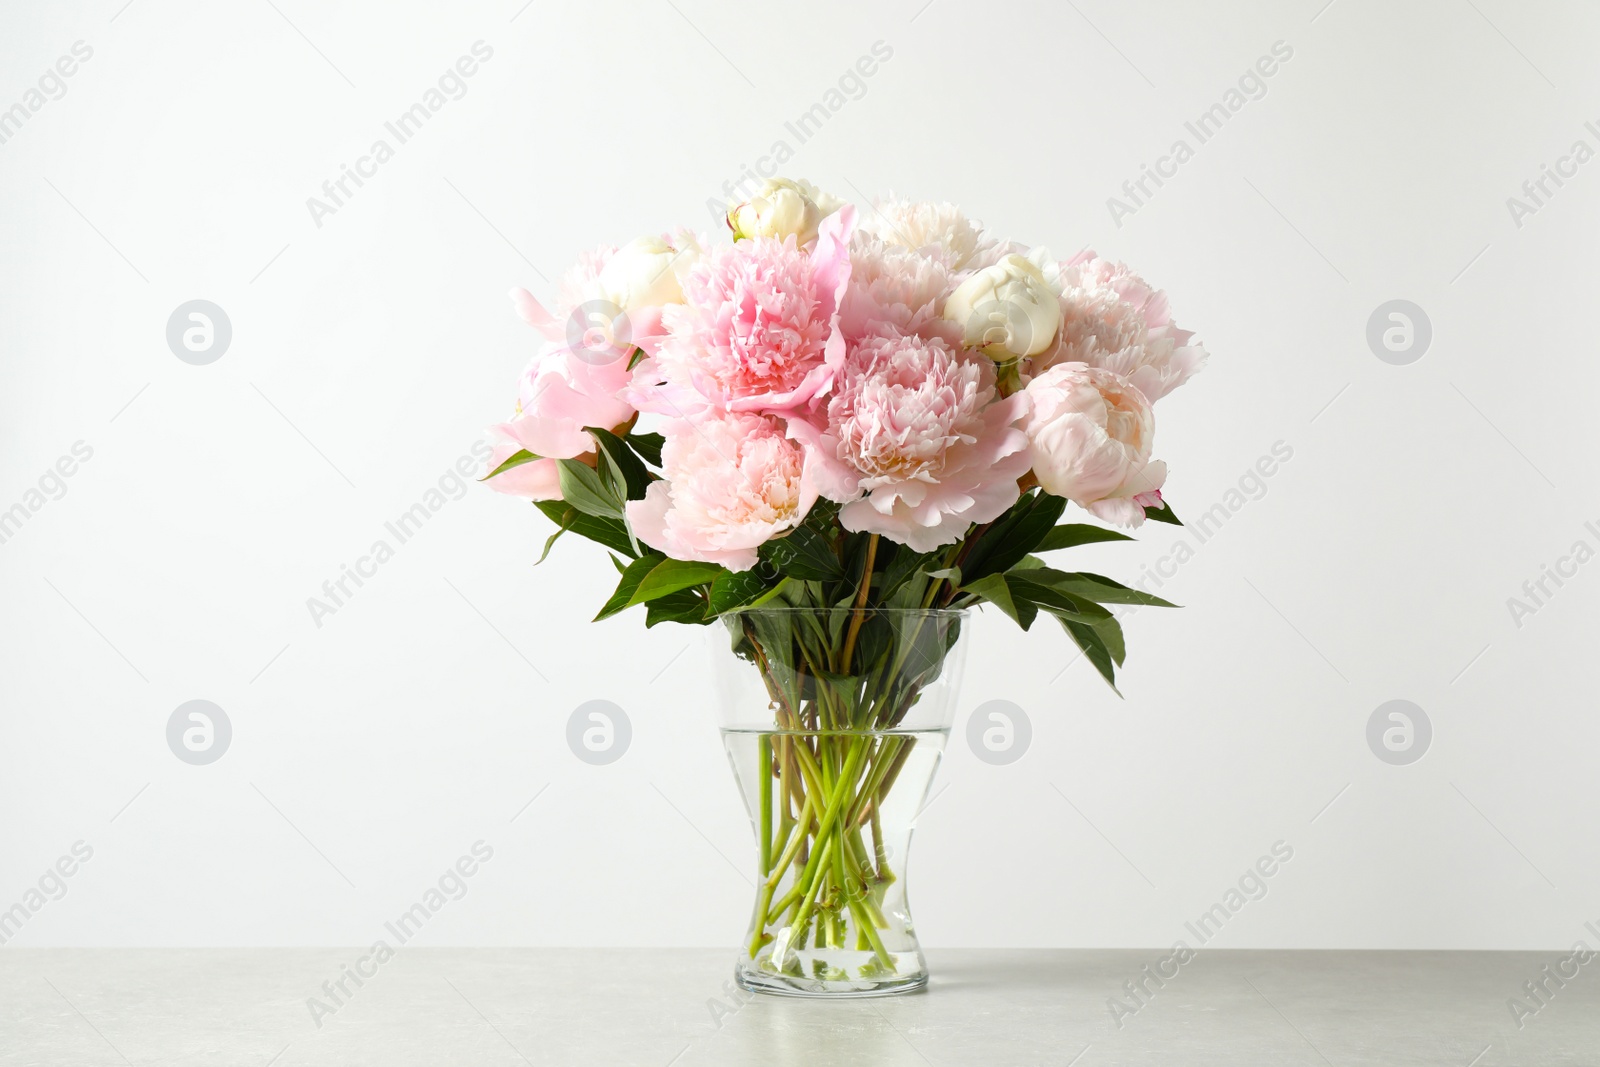 Photo of Beautiful peony bouquet in vase on table against white background